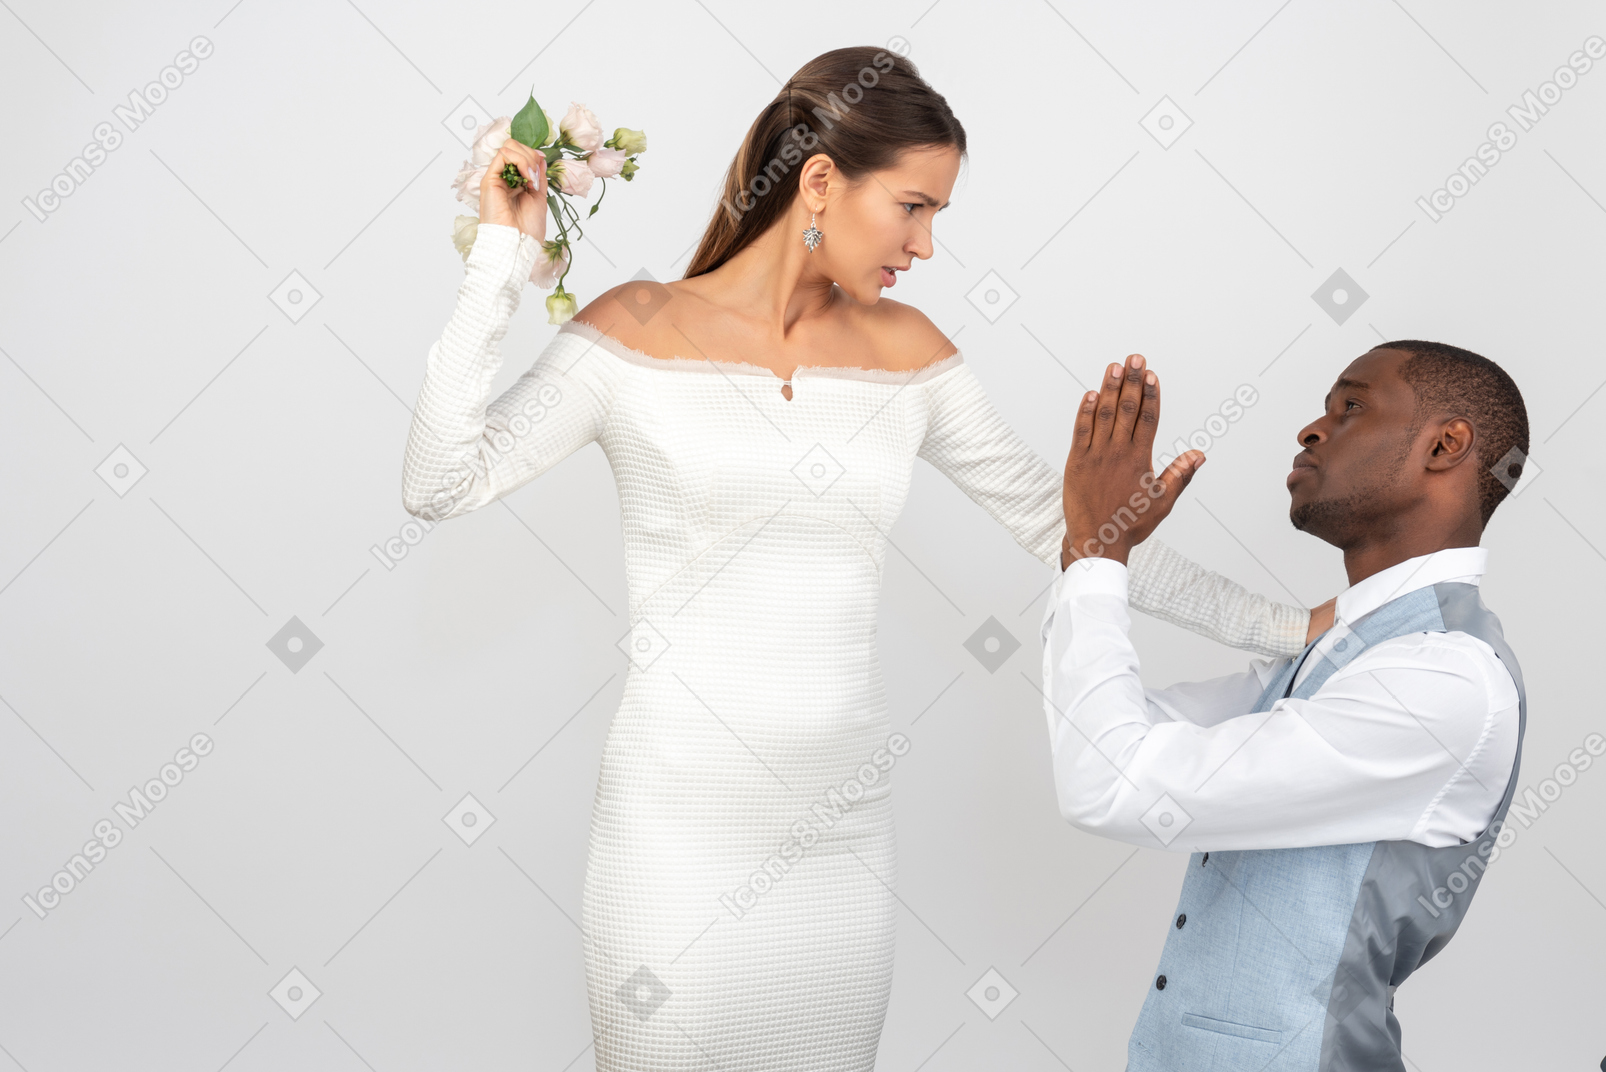 Bride is going to punch groom with the wedding bouquet